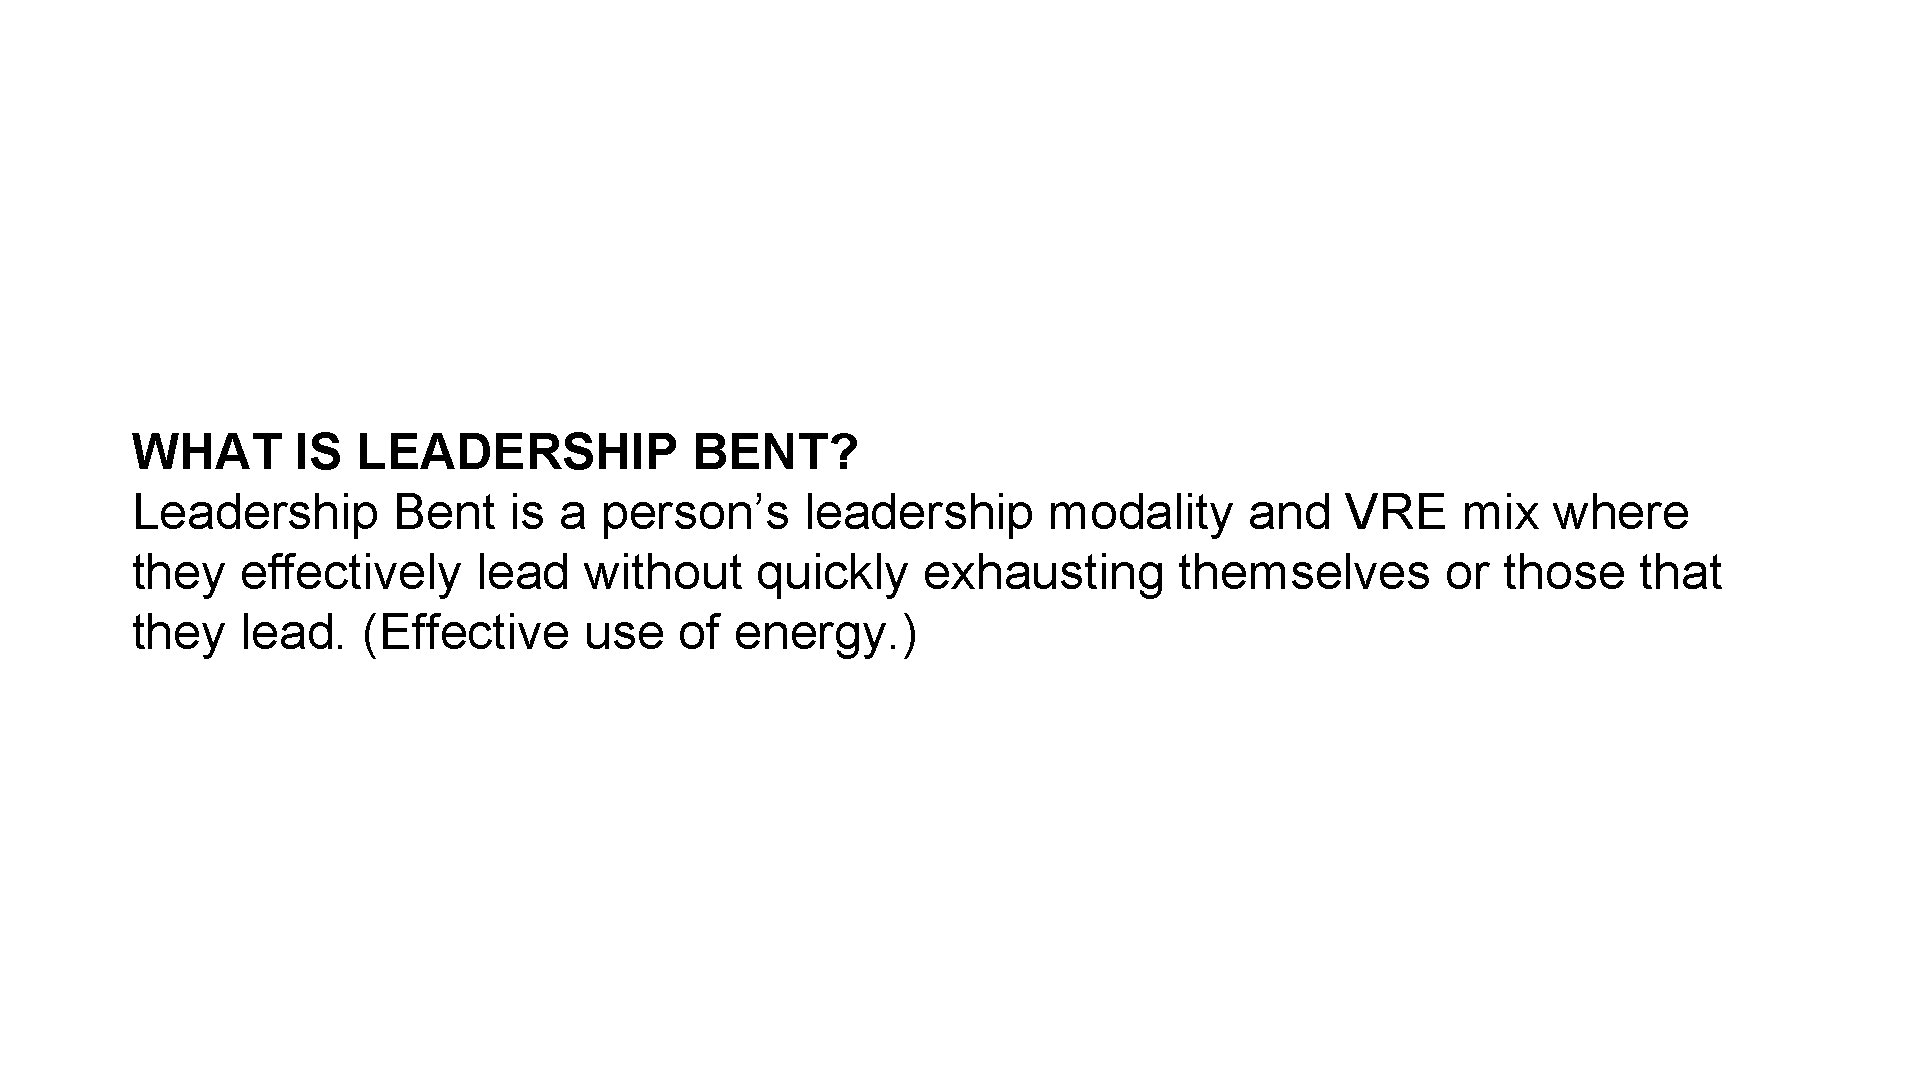 WHAT IS LEADERSHIP BENT? Leadership Bent is a person’s leadership modality and VRE mix